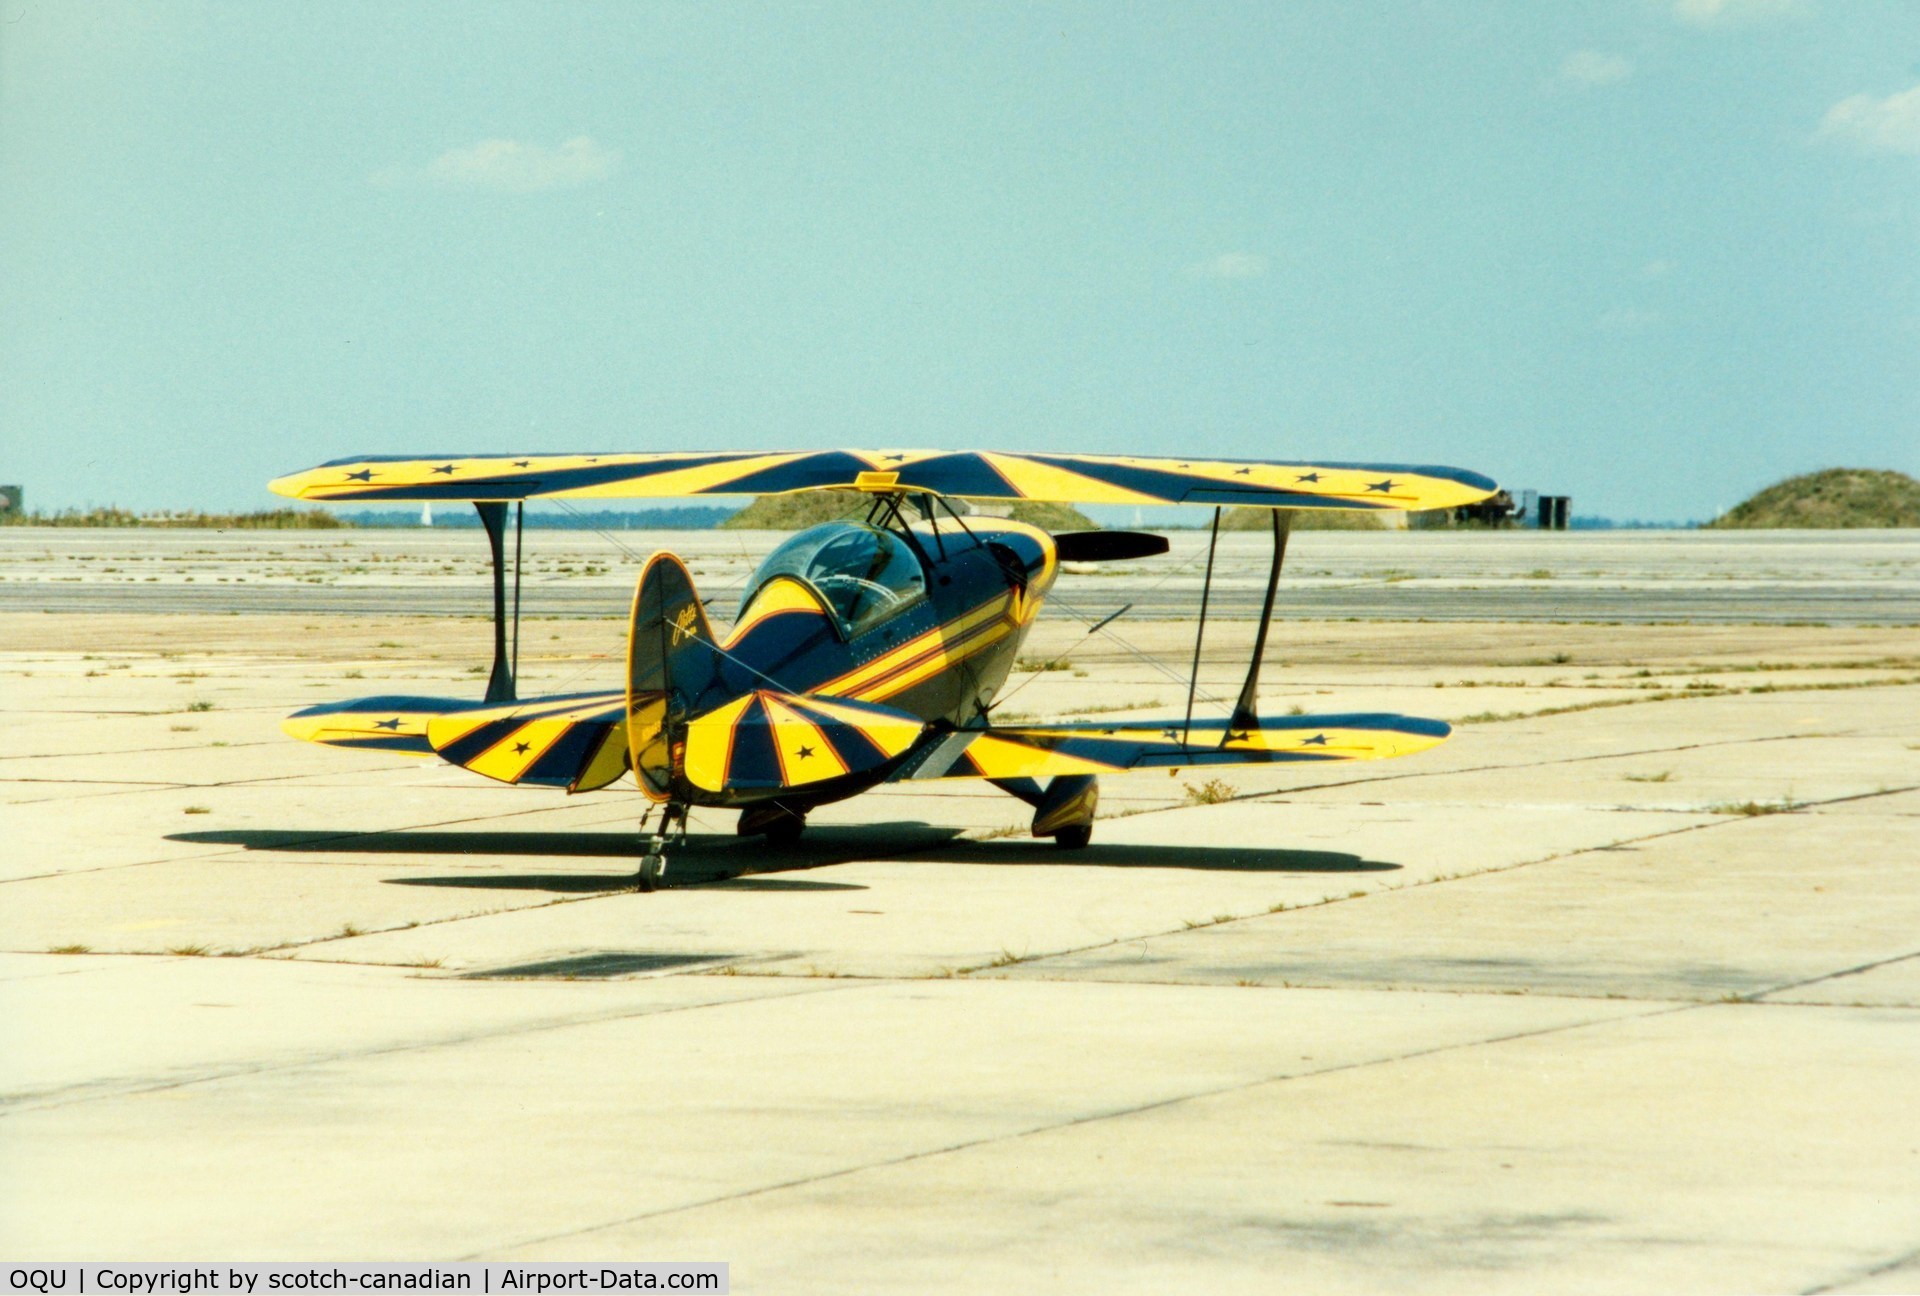 Quonset State Airport (OQU) - Pitts S-2A at Quonset State Airport, North Kingstown, RI - circa 1980's